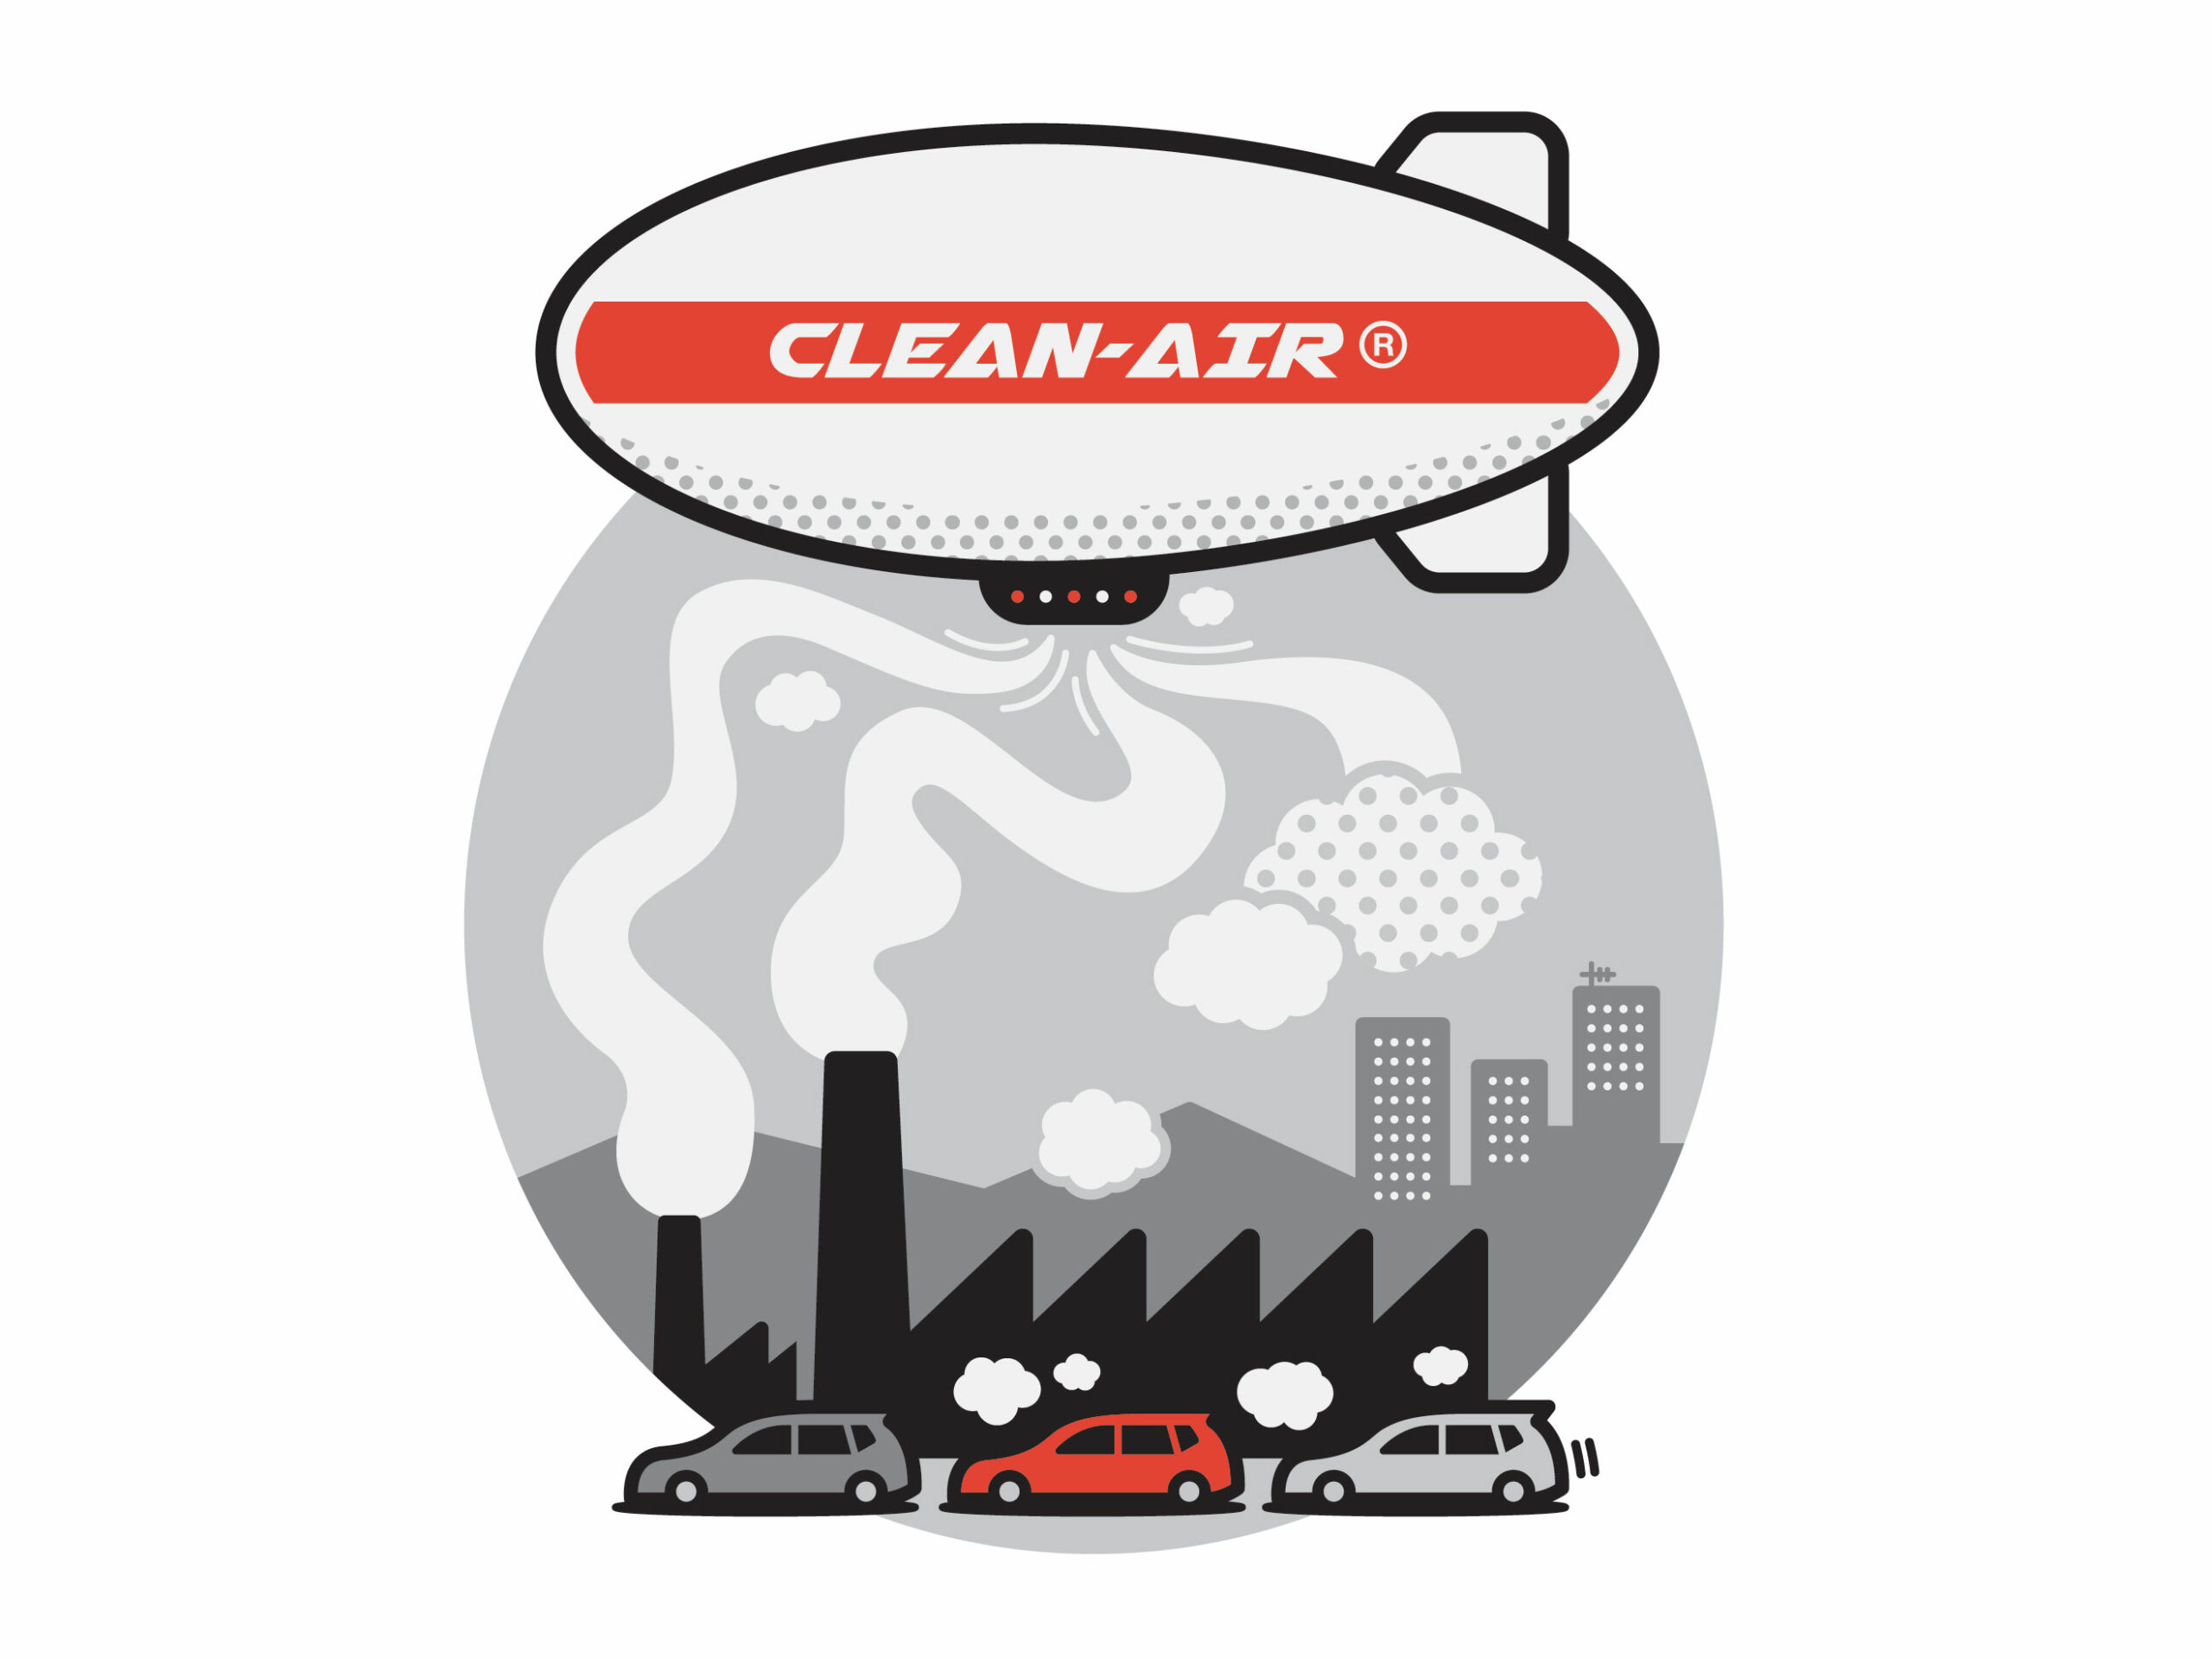 Can we just build a giant blimp to clean polluted air?